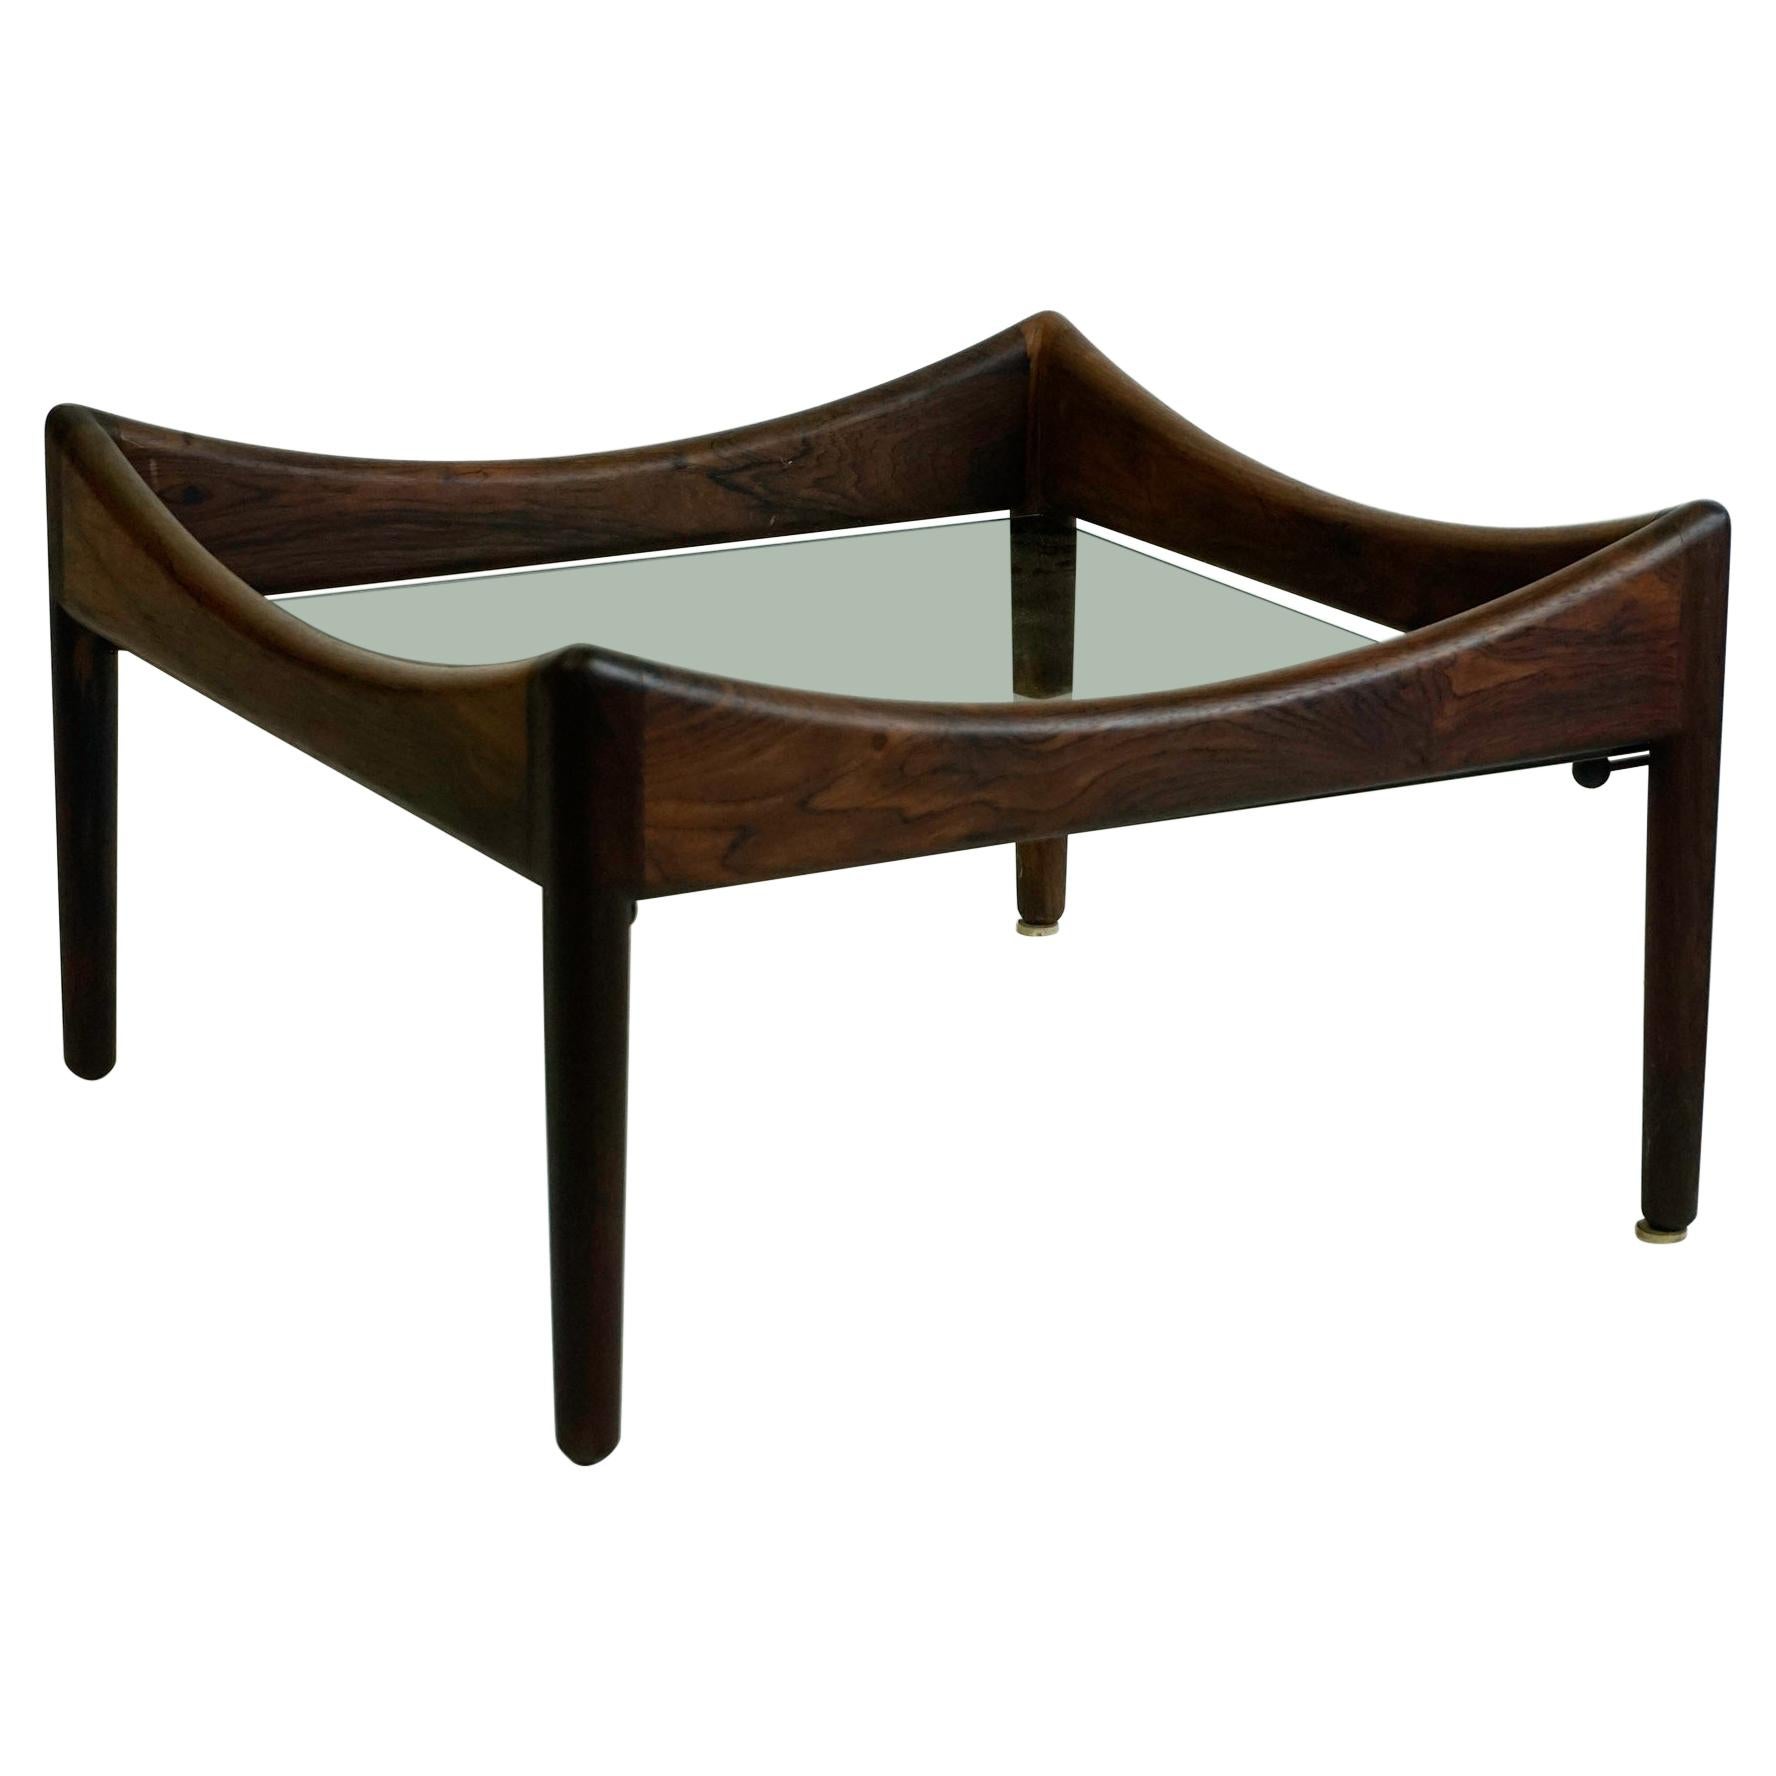 Scandinavian Modern Rosewood and Glass Coffee Table Modus by Kristian Vedel